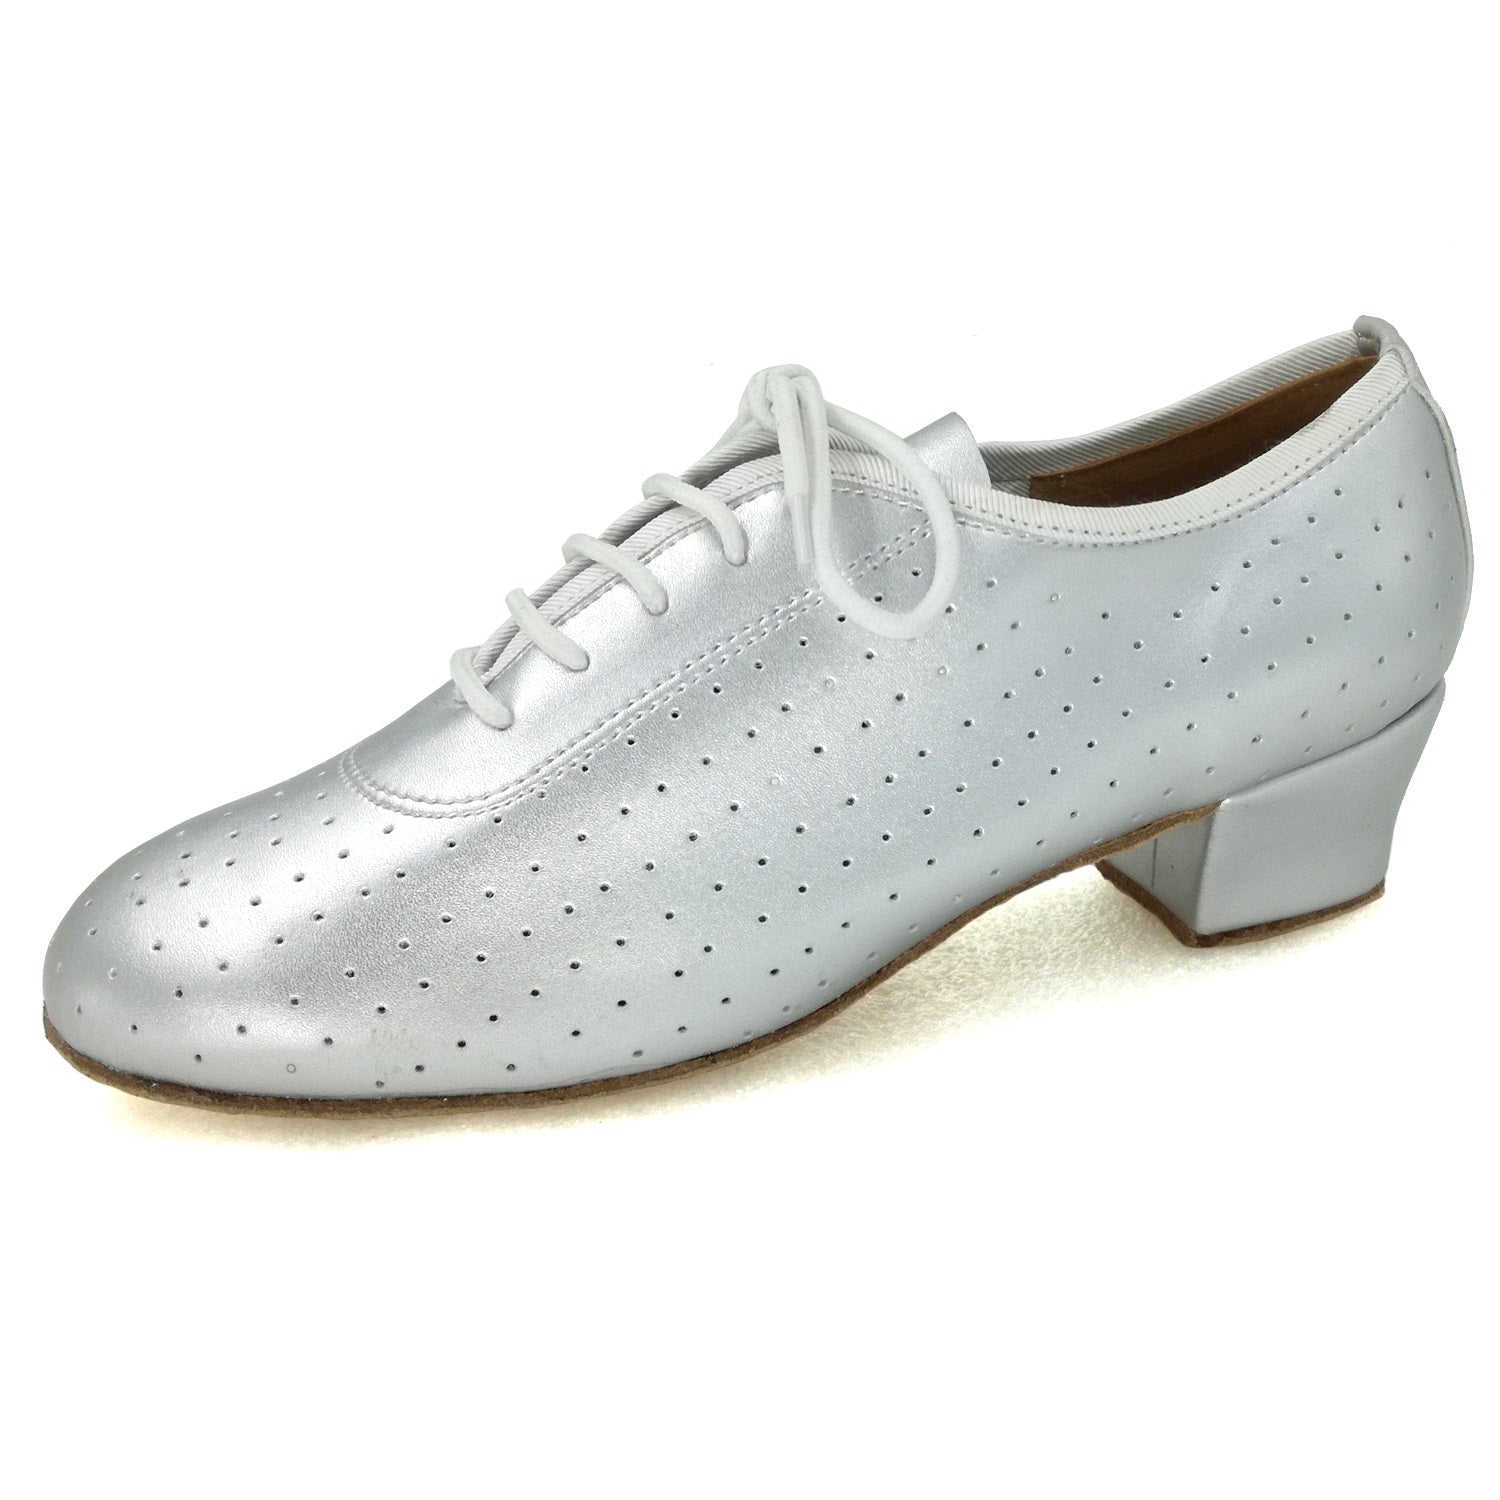 Women Ballroom Dancing Shoes with Suede Sole Lace-up Closed-toe in Silver for Tango Latin Practice (PD5002C)3